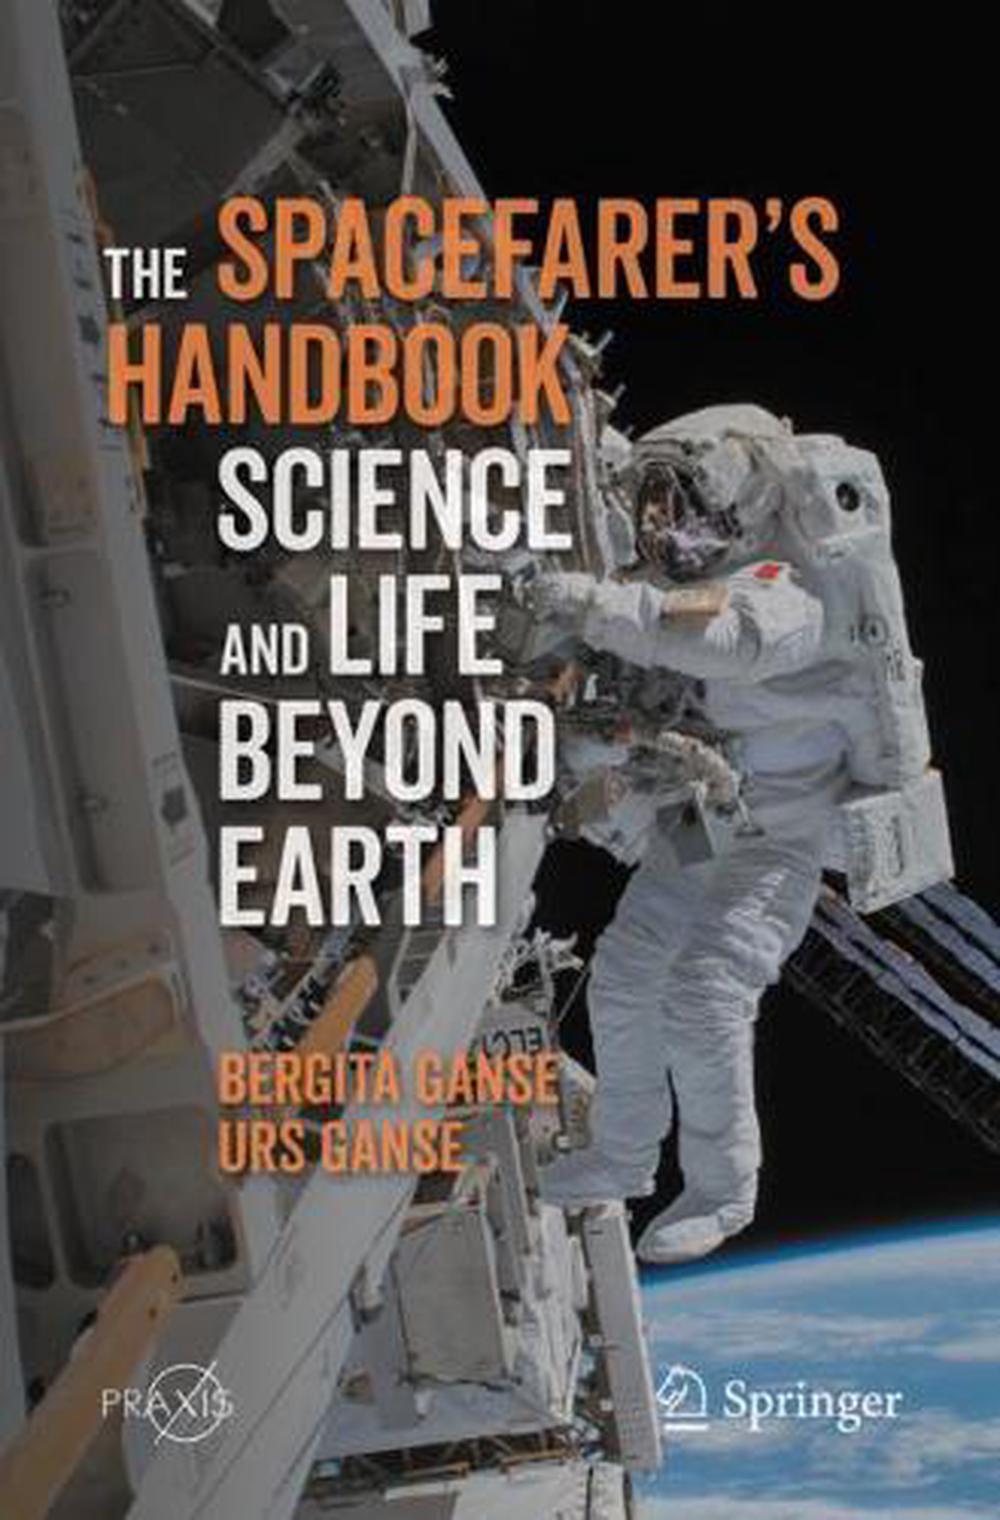 The Spacefarer's Handbook Science and Life Beyond Earth